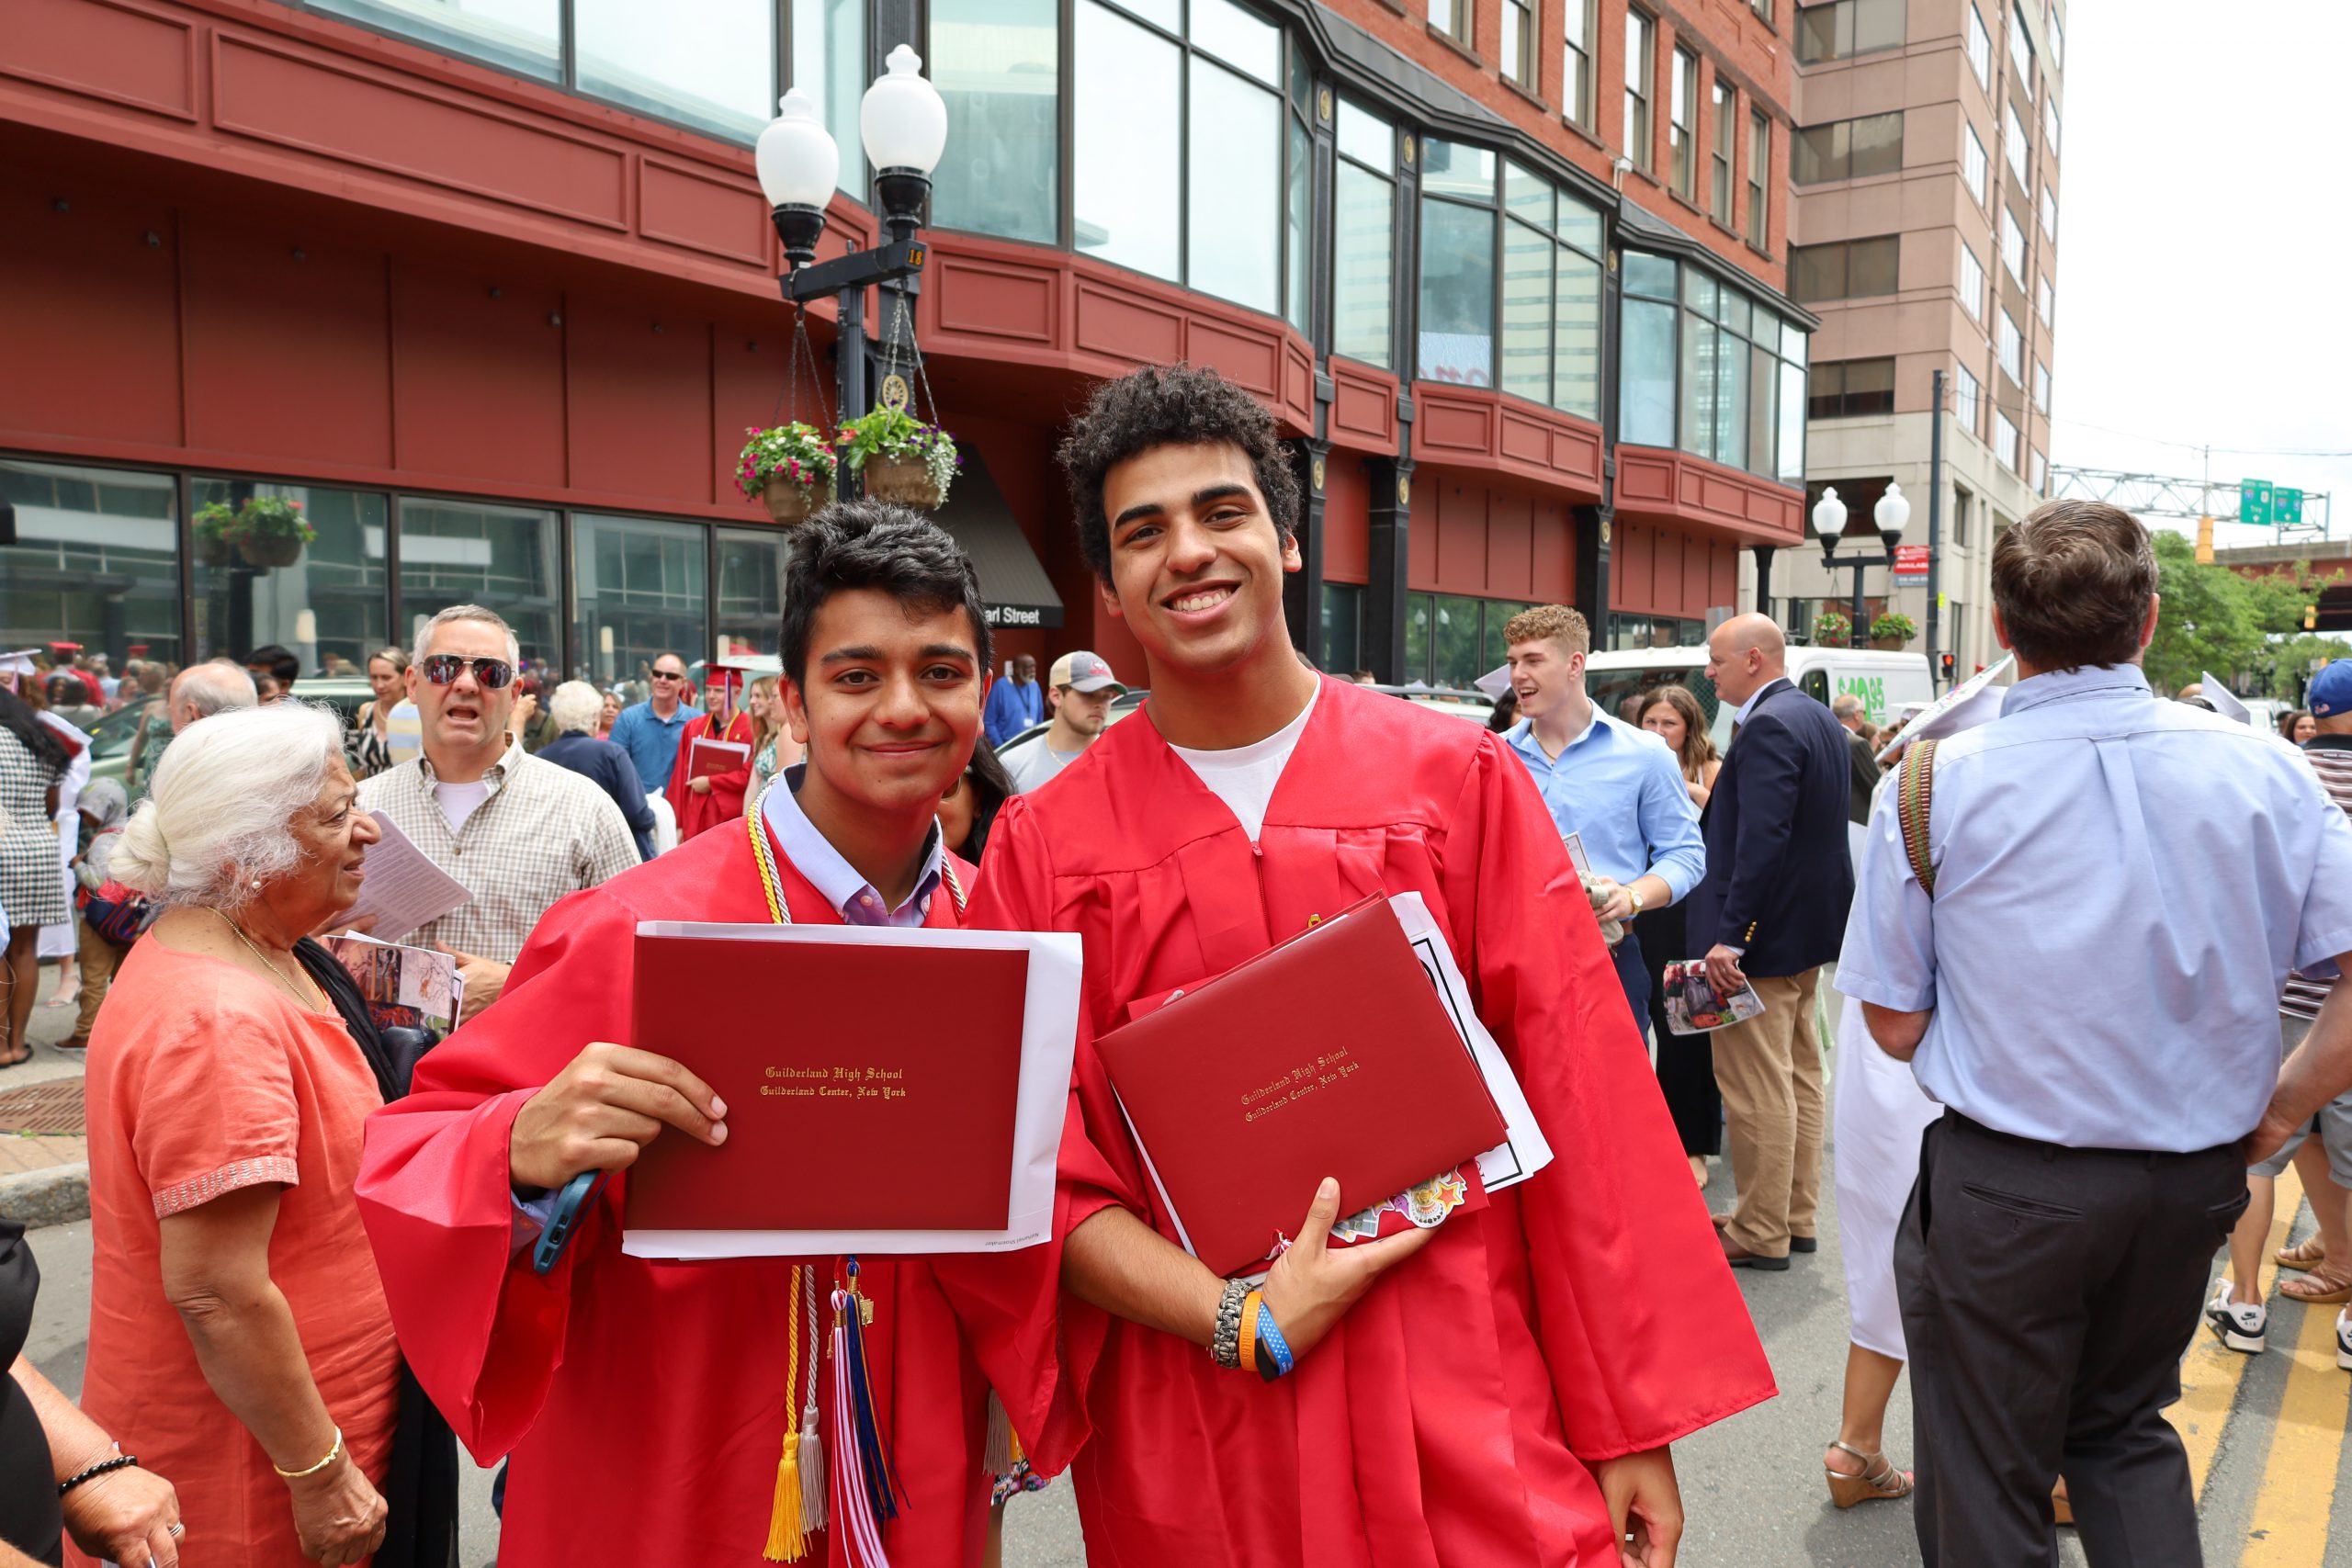 Two students wearing red gowns hold up their diplomas. They are standing side by side outside, people are waling behind them